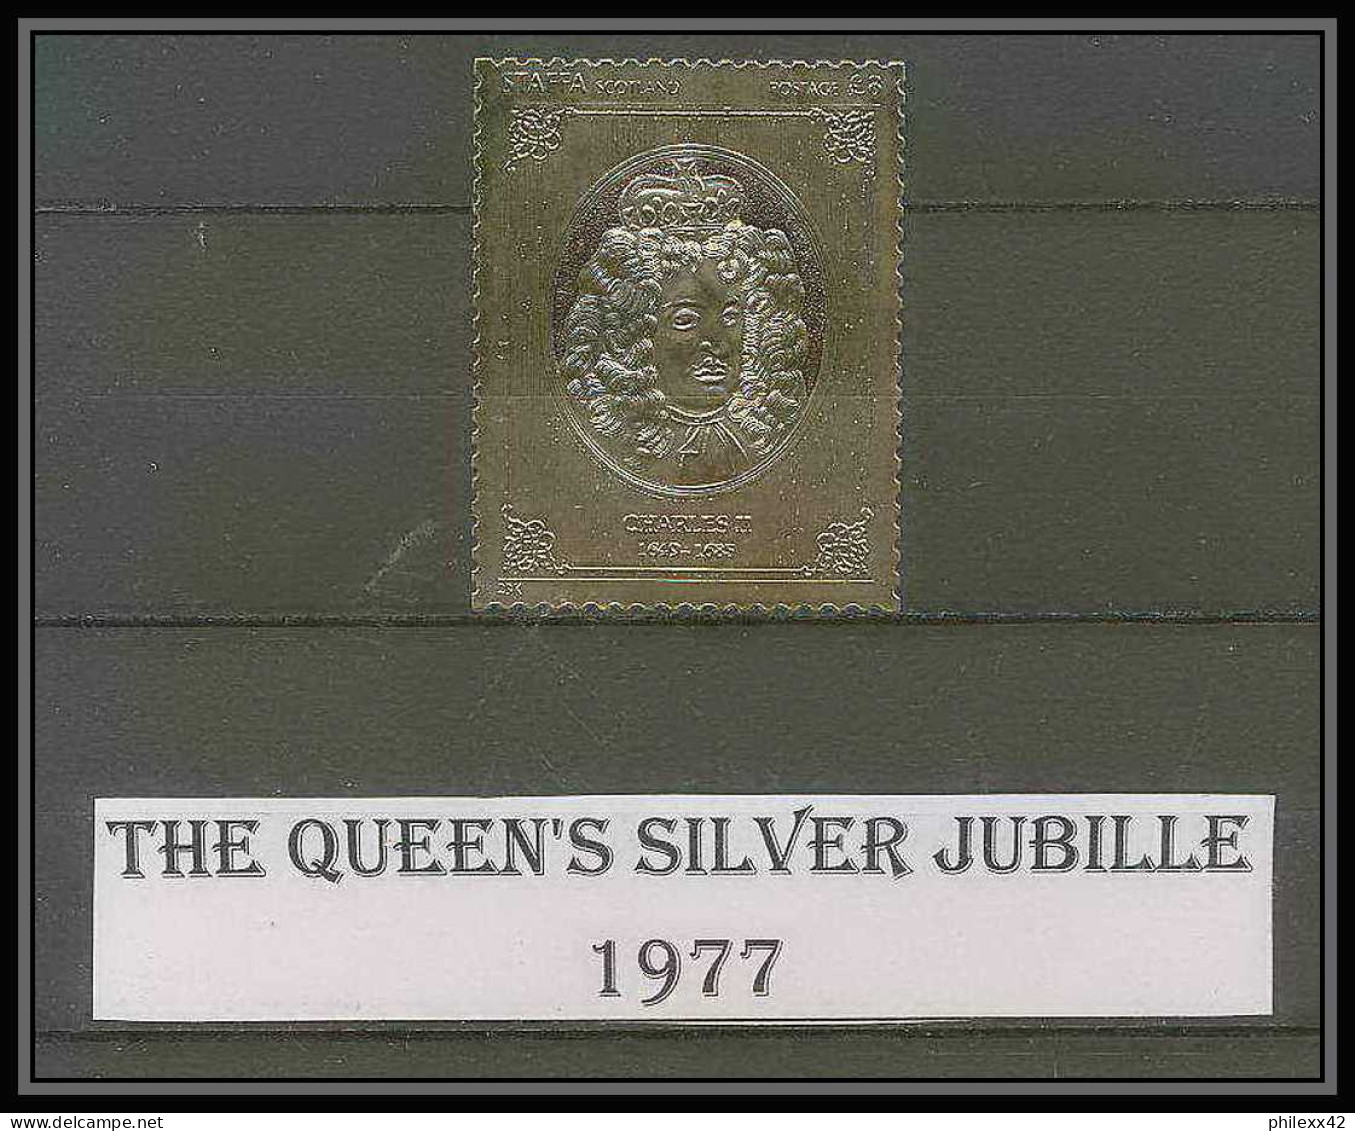 461 Staffa Scotland The Queen's Silver Jubilee 1977 OR Gold Stamps Monarchy United Kingdom Charles 2 Type 1 Neuf** Mnh - Lokale Uitgaven